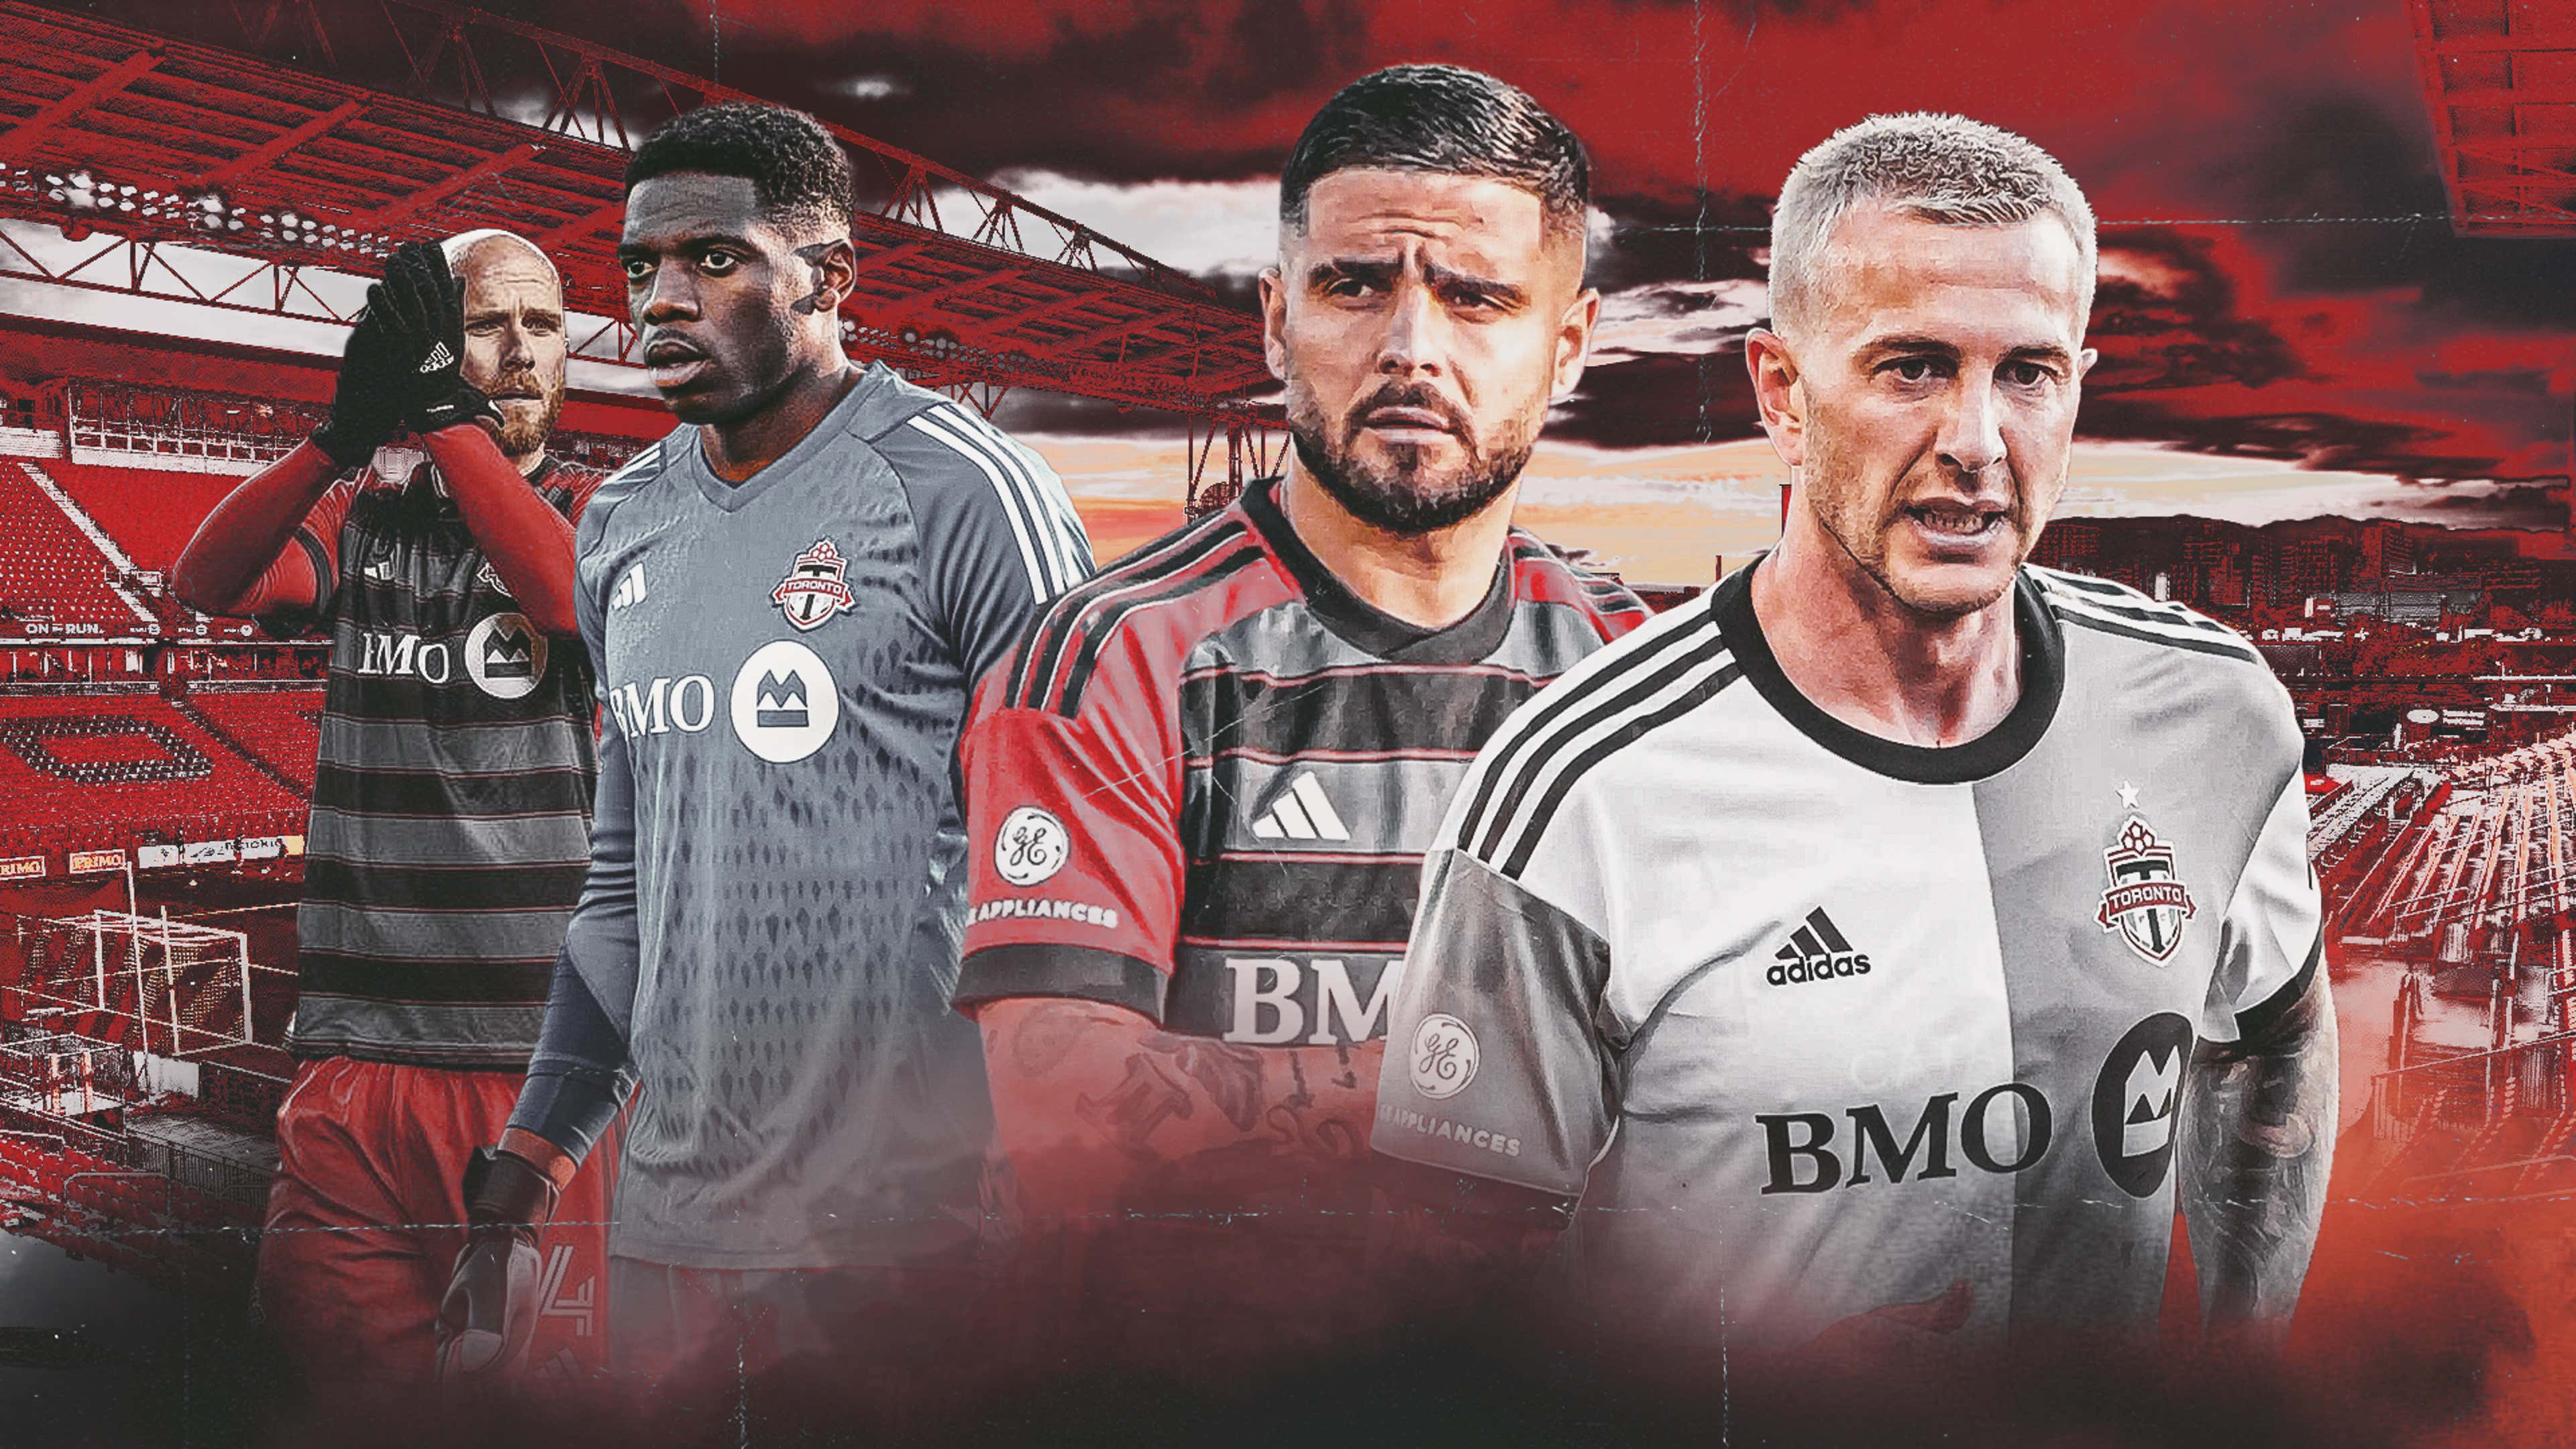 Toronto FC officially allowed to start playing home games at BMO